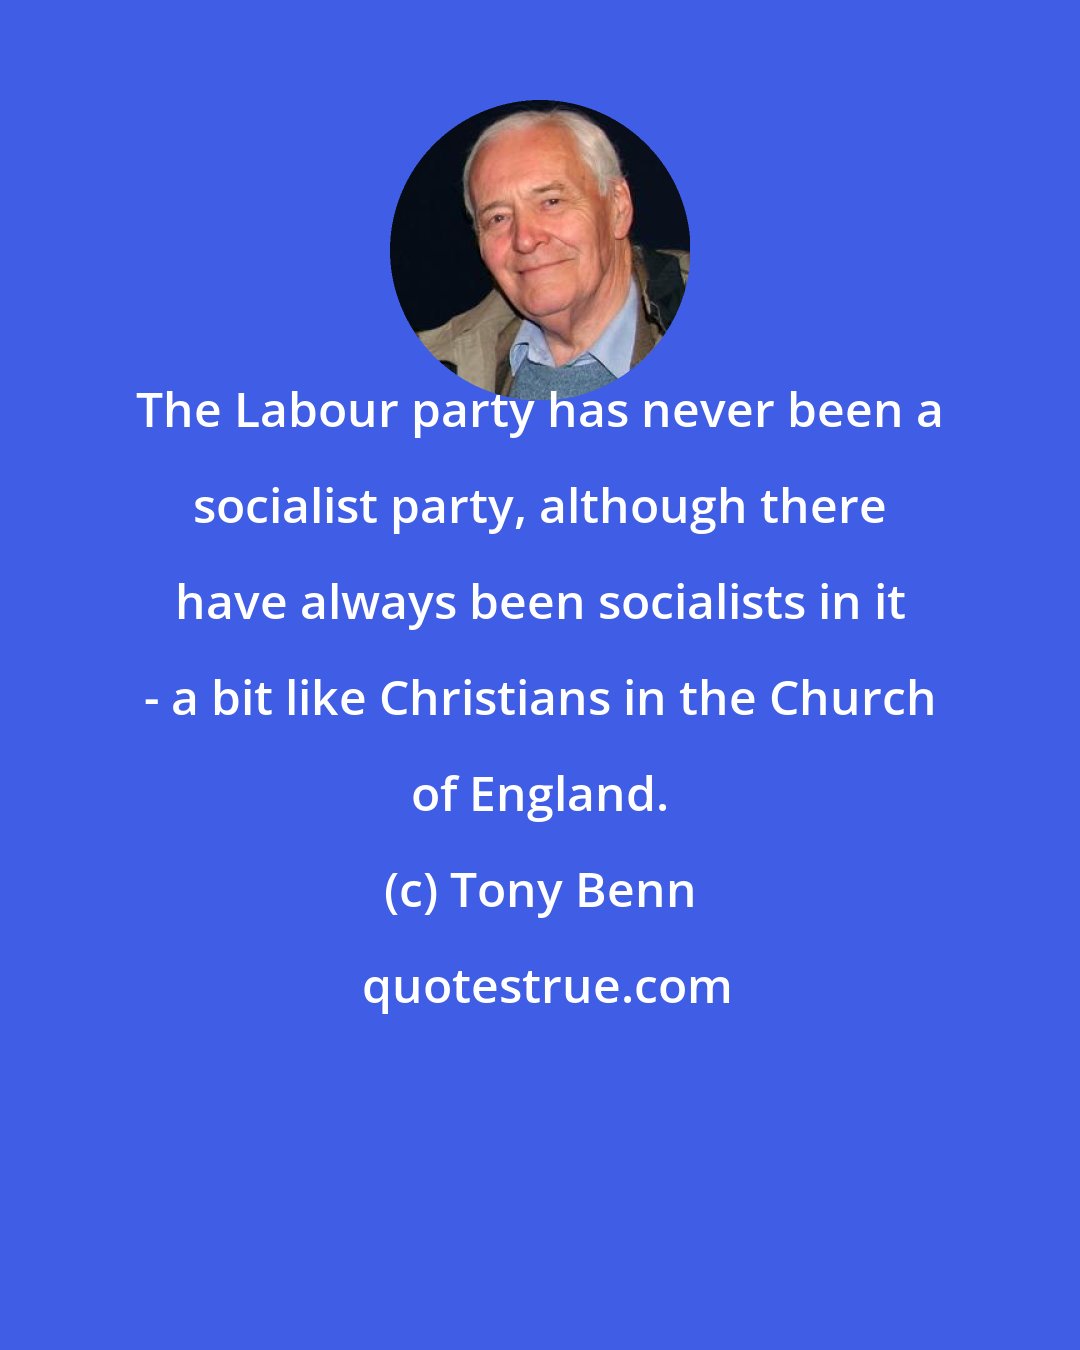 Tony Benn: The Labour party has never been a socialist party, although there have always been socialists in it - a bit like Christians in the Church of England.